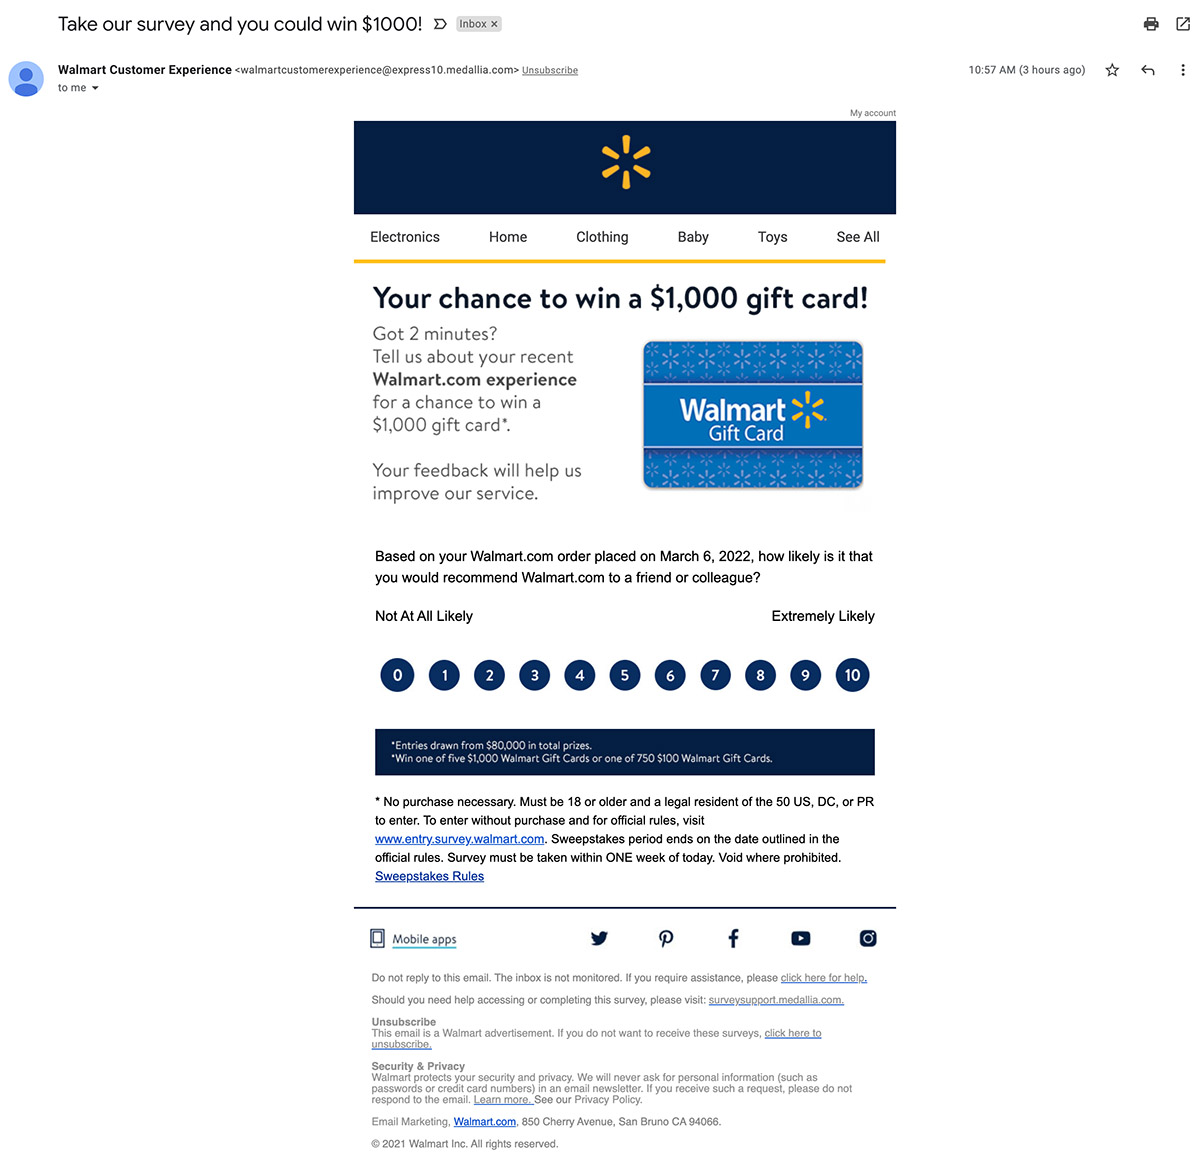 A Walmart email promised a chance to enter to win a $1000 gift card in a special sweepstakes all for taking a survey.